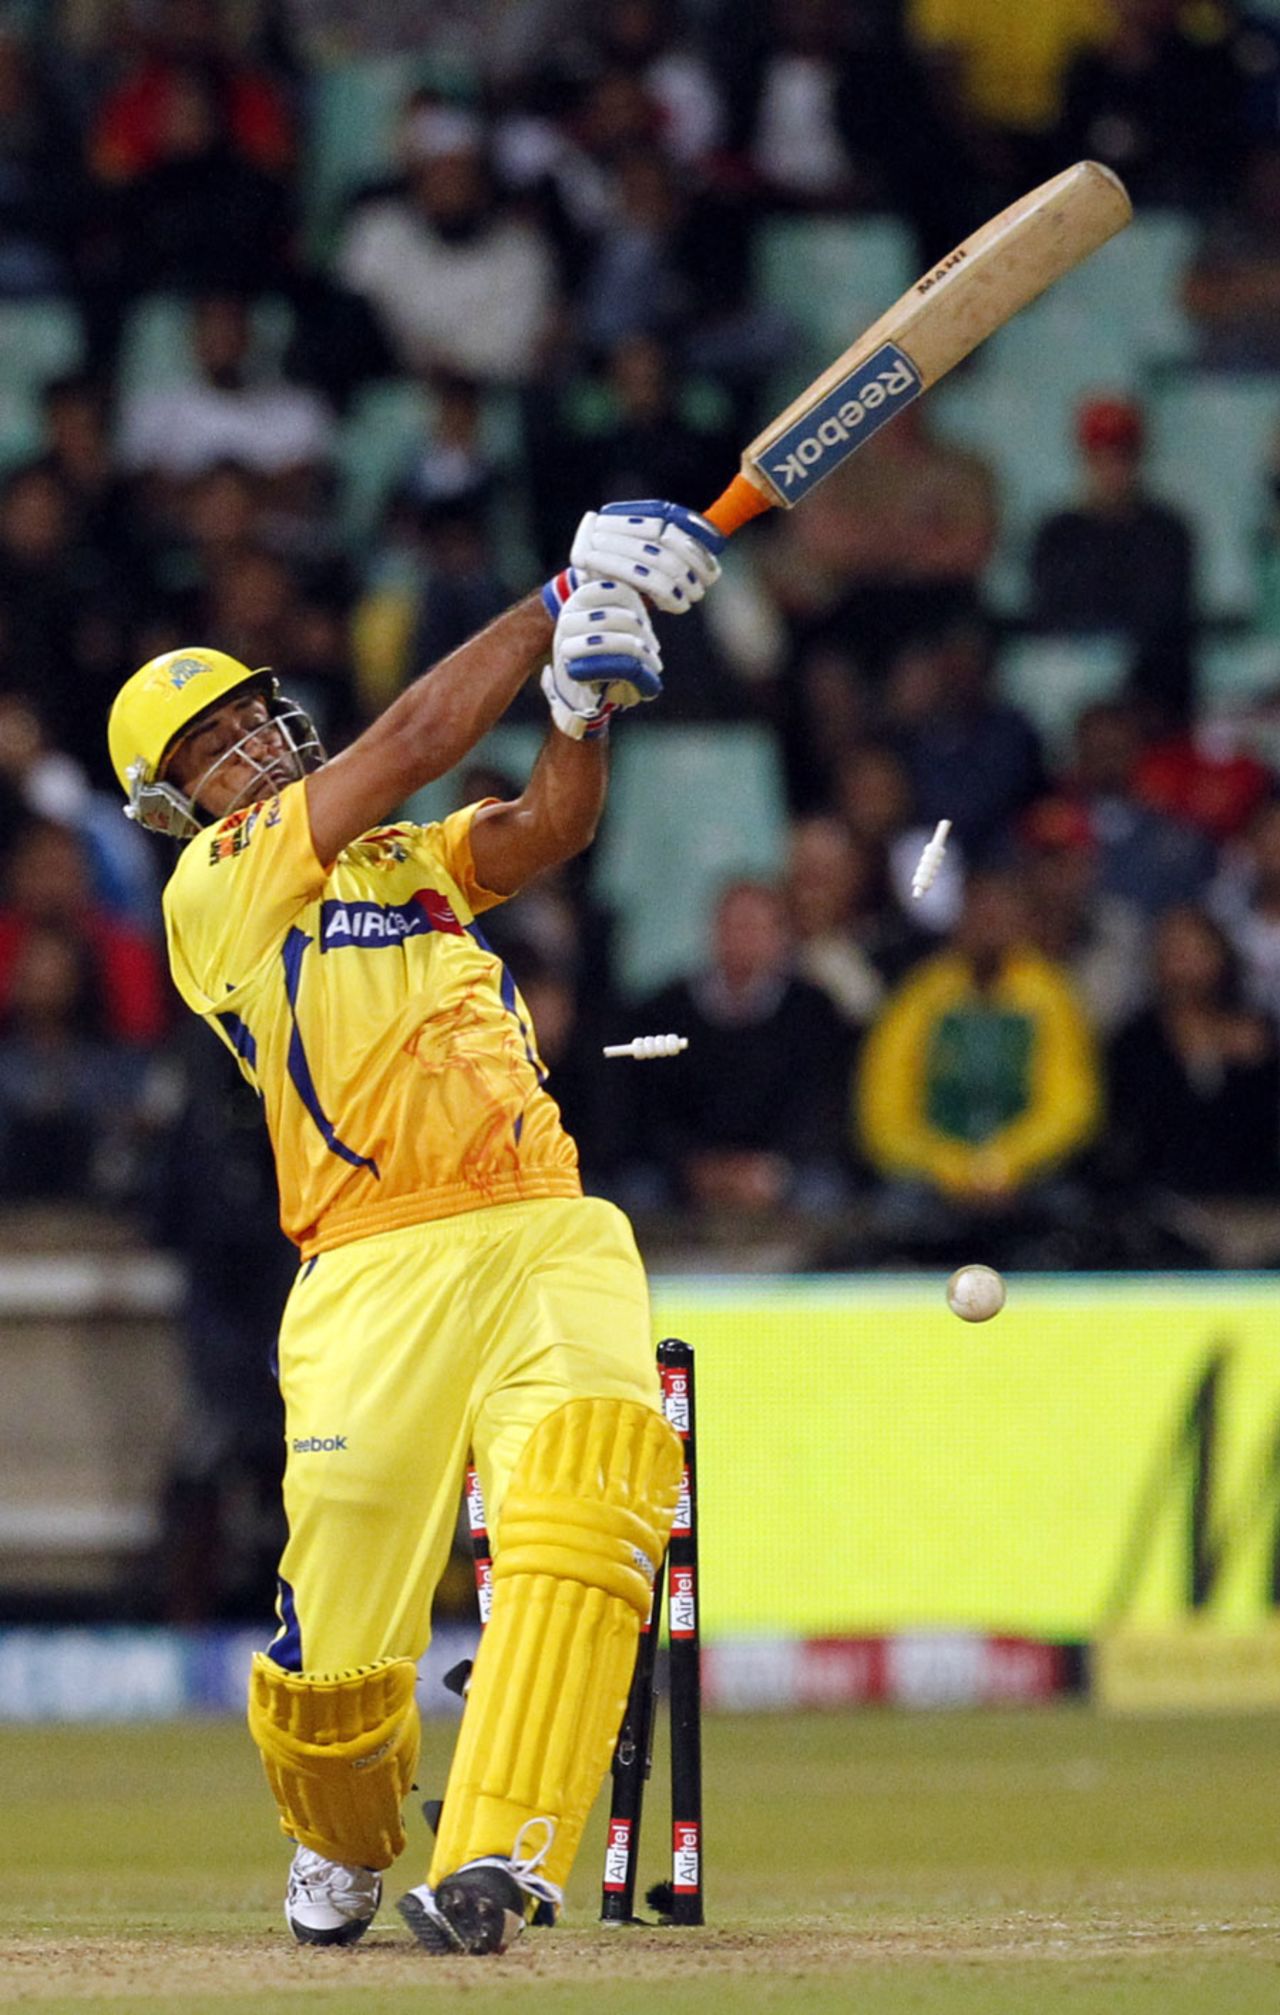 MS Dhoni is bowled while going for a big one, Chennai Super Kings v Royal Challengers Bangalore, Champions League Twenty20, Durban, September 24, 2010